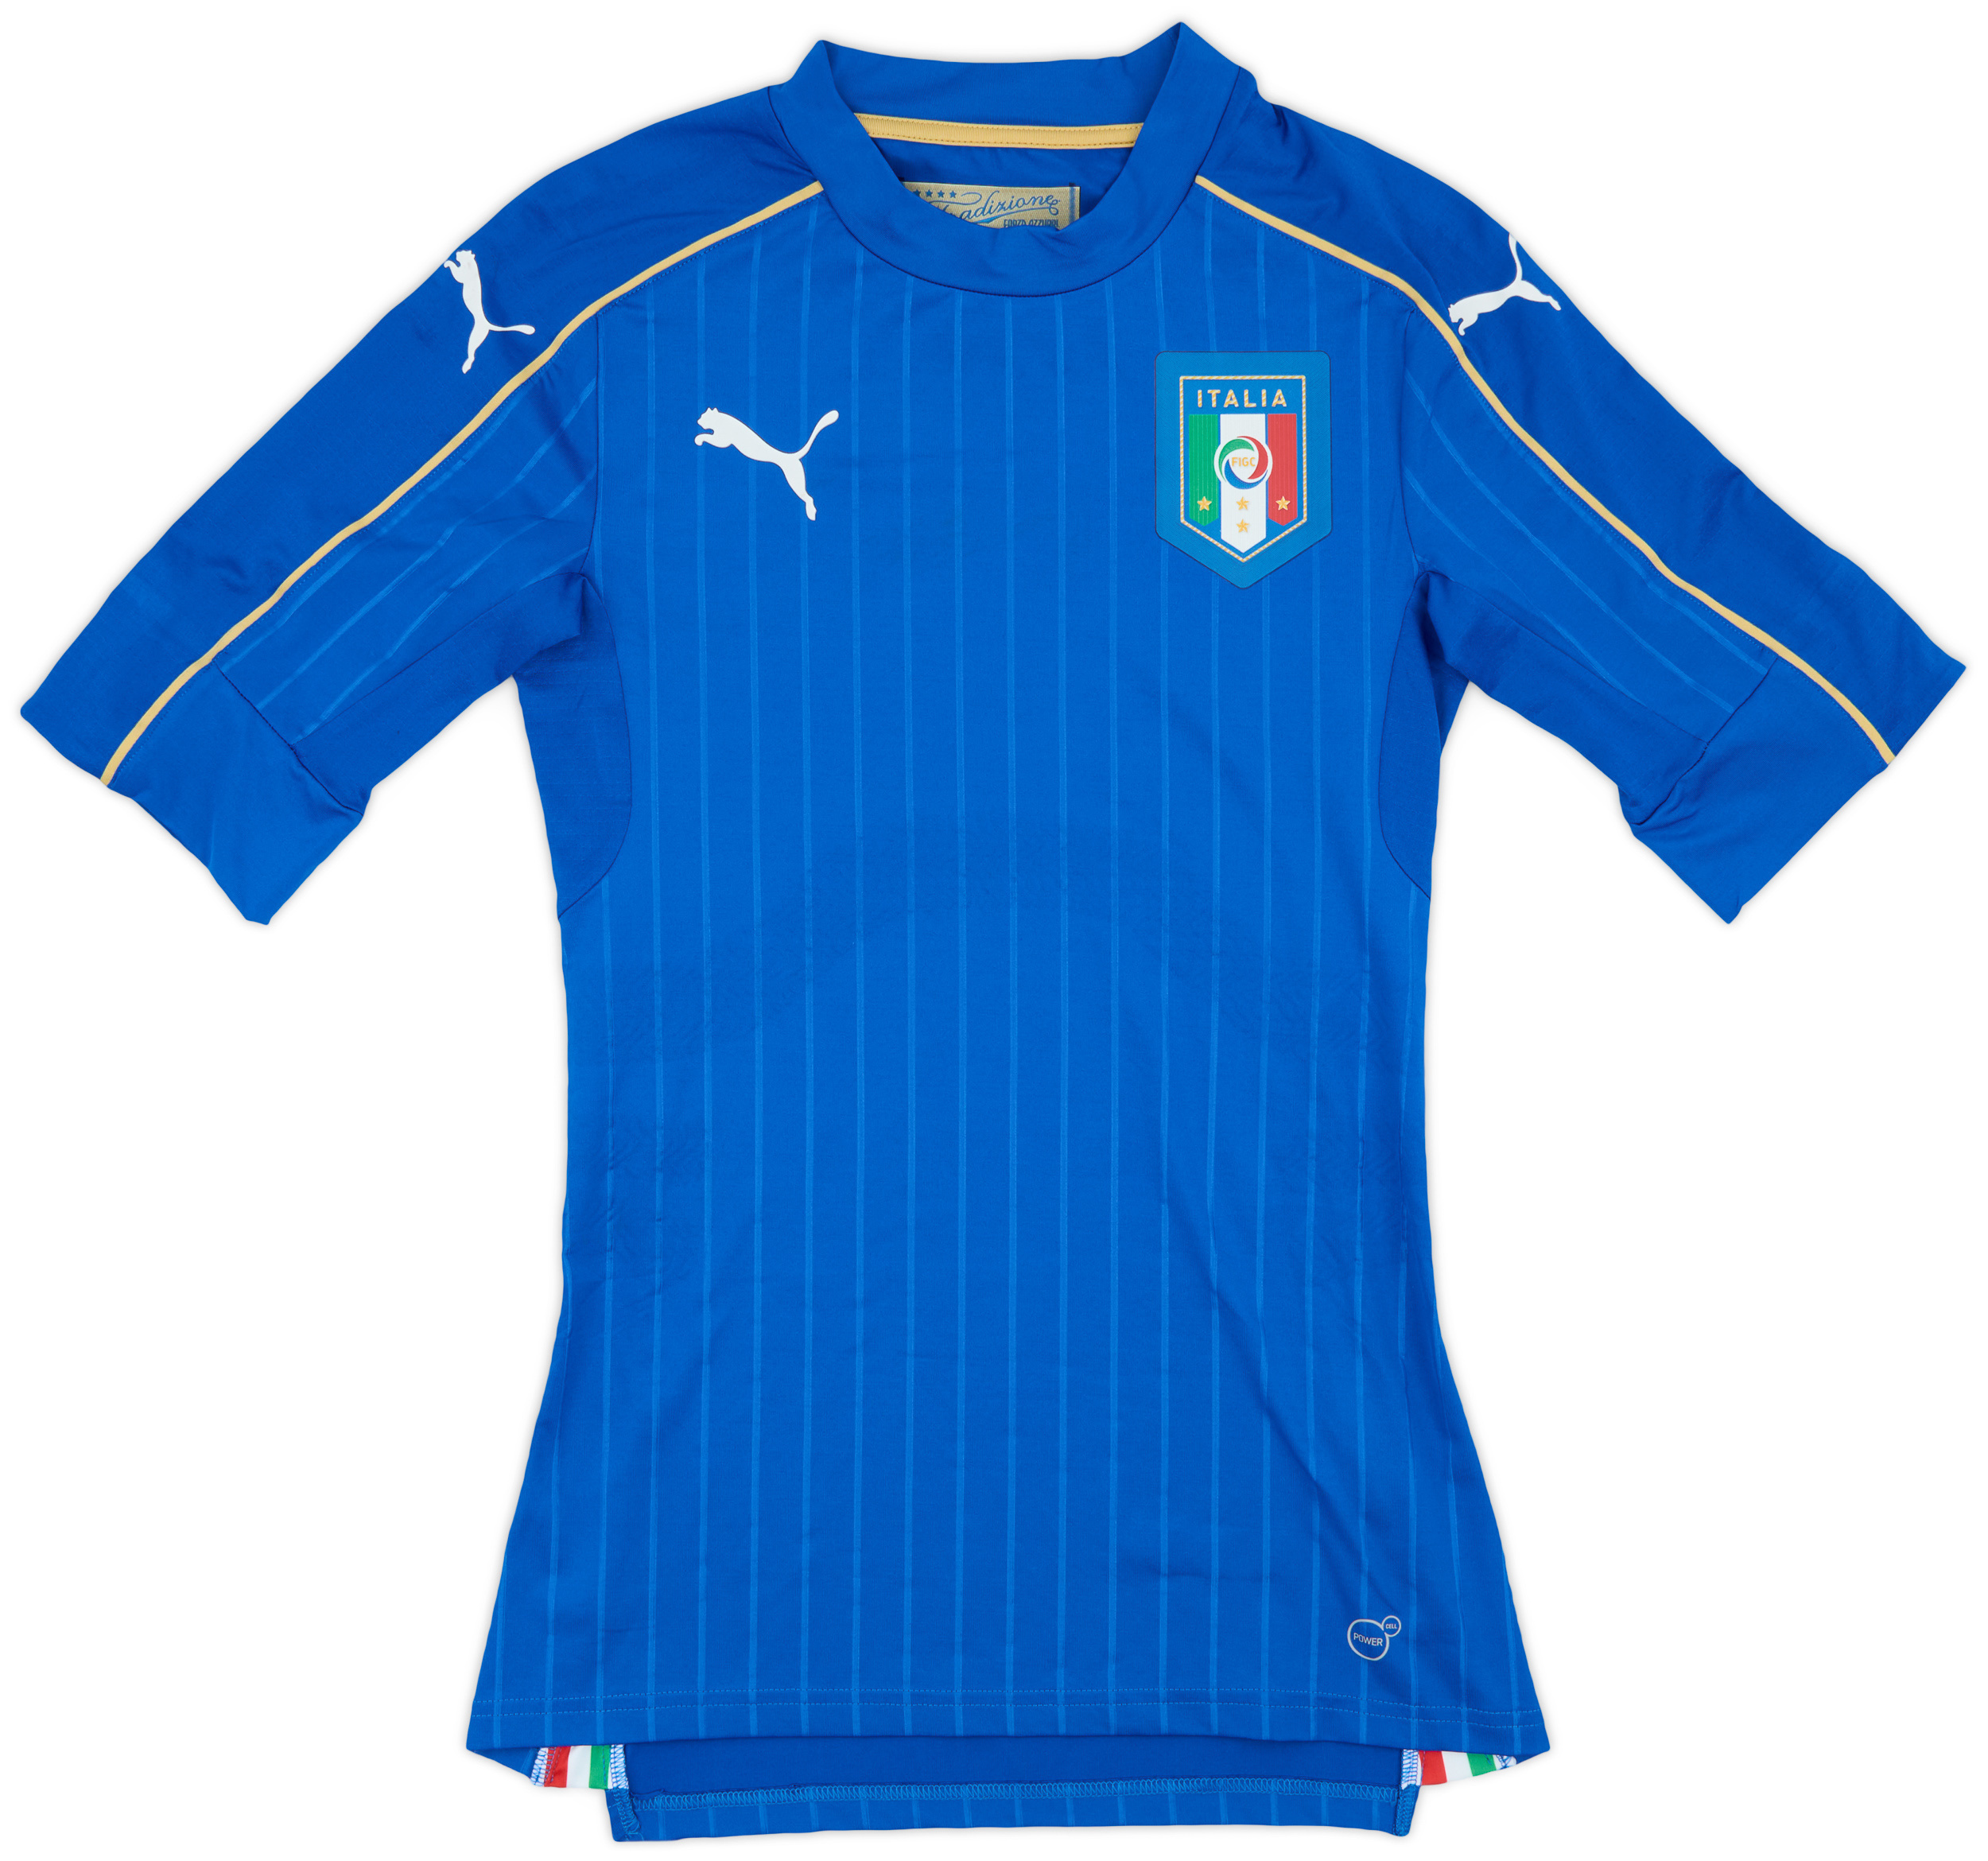 2016-17 Italy Player Issue (ACTV Fit) Home Shirt - 9/10 - ()